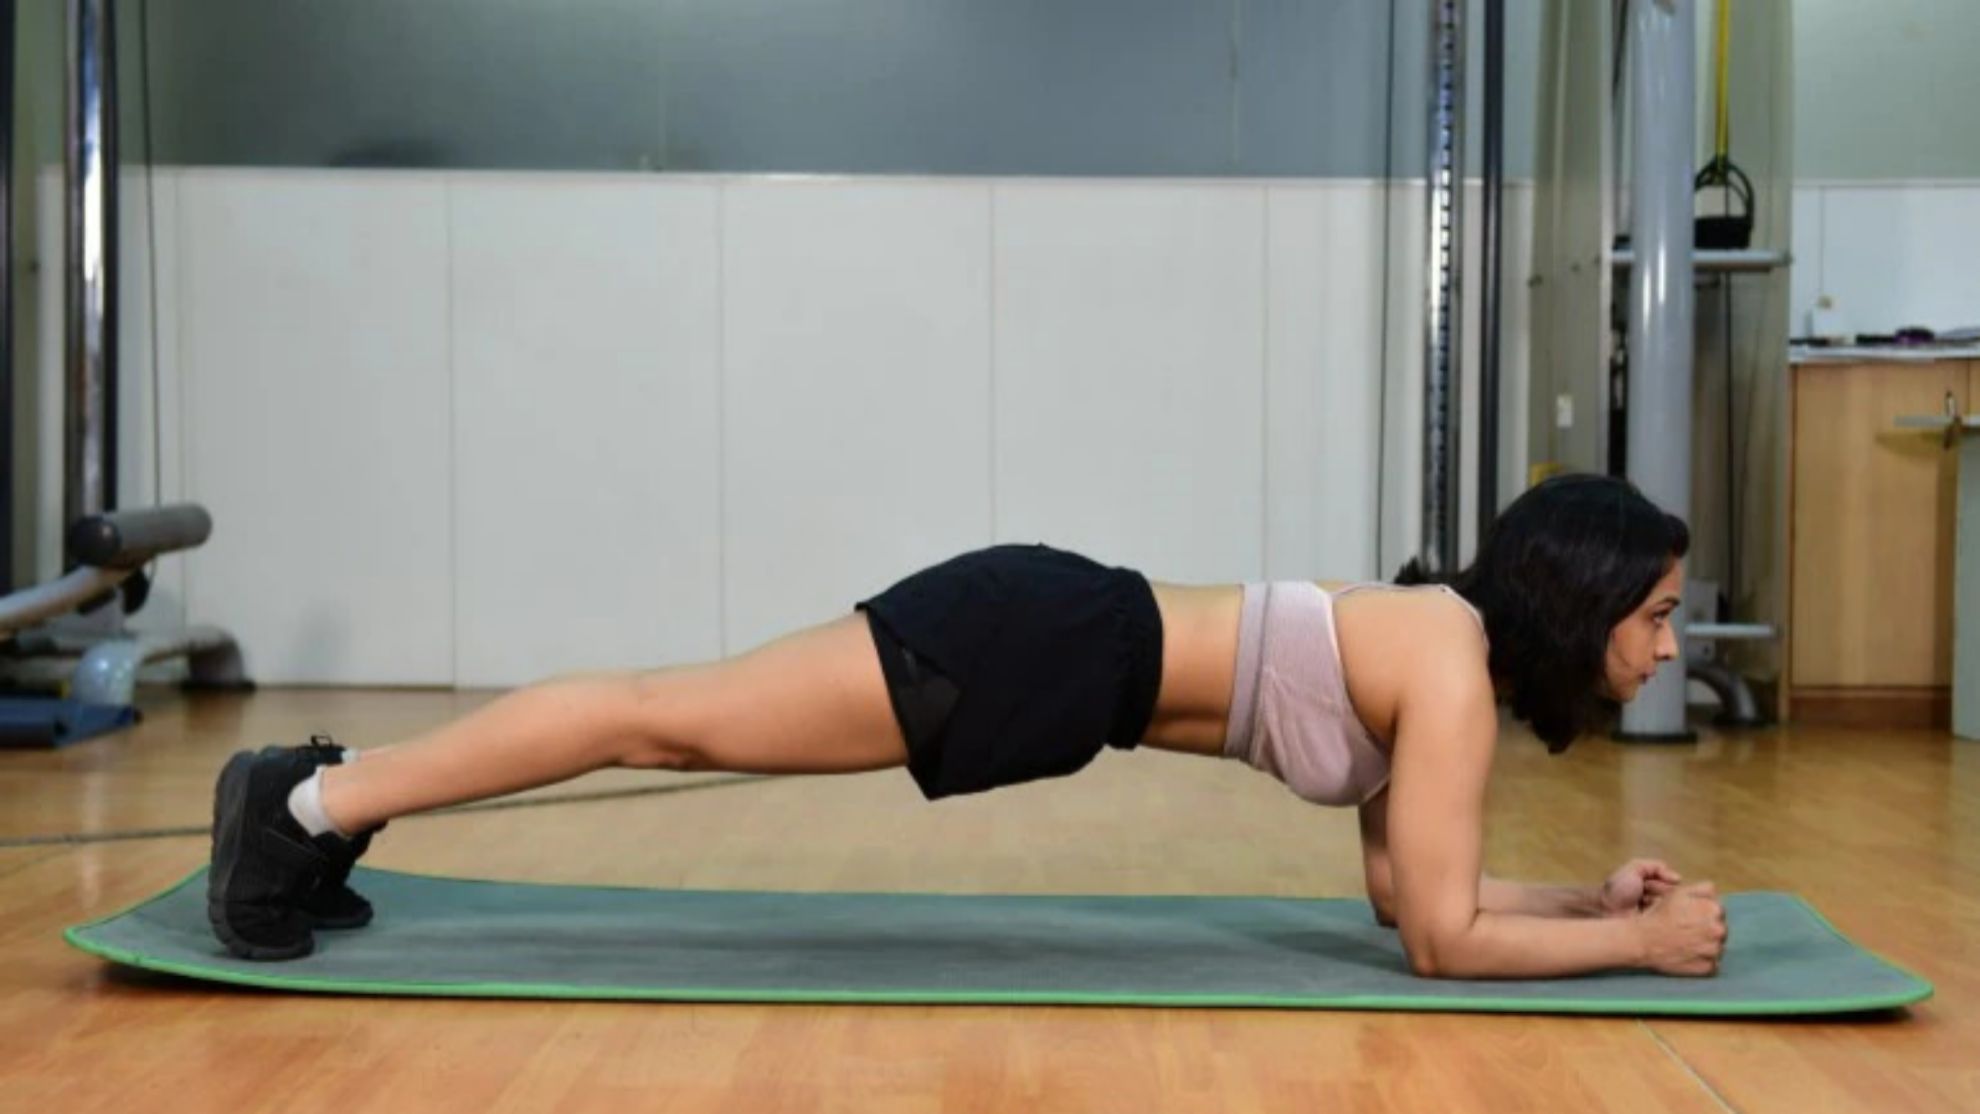 Plank Exercise Routine: How to do planks to get a flat stomach | Marca